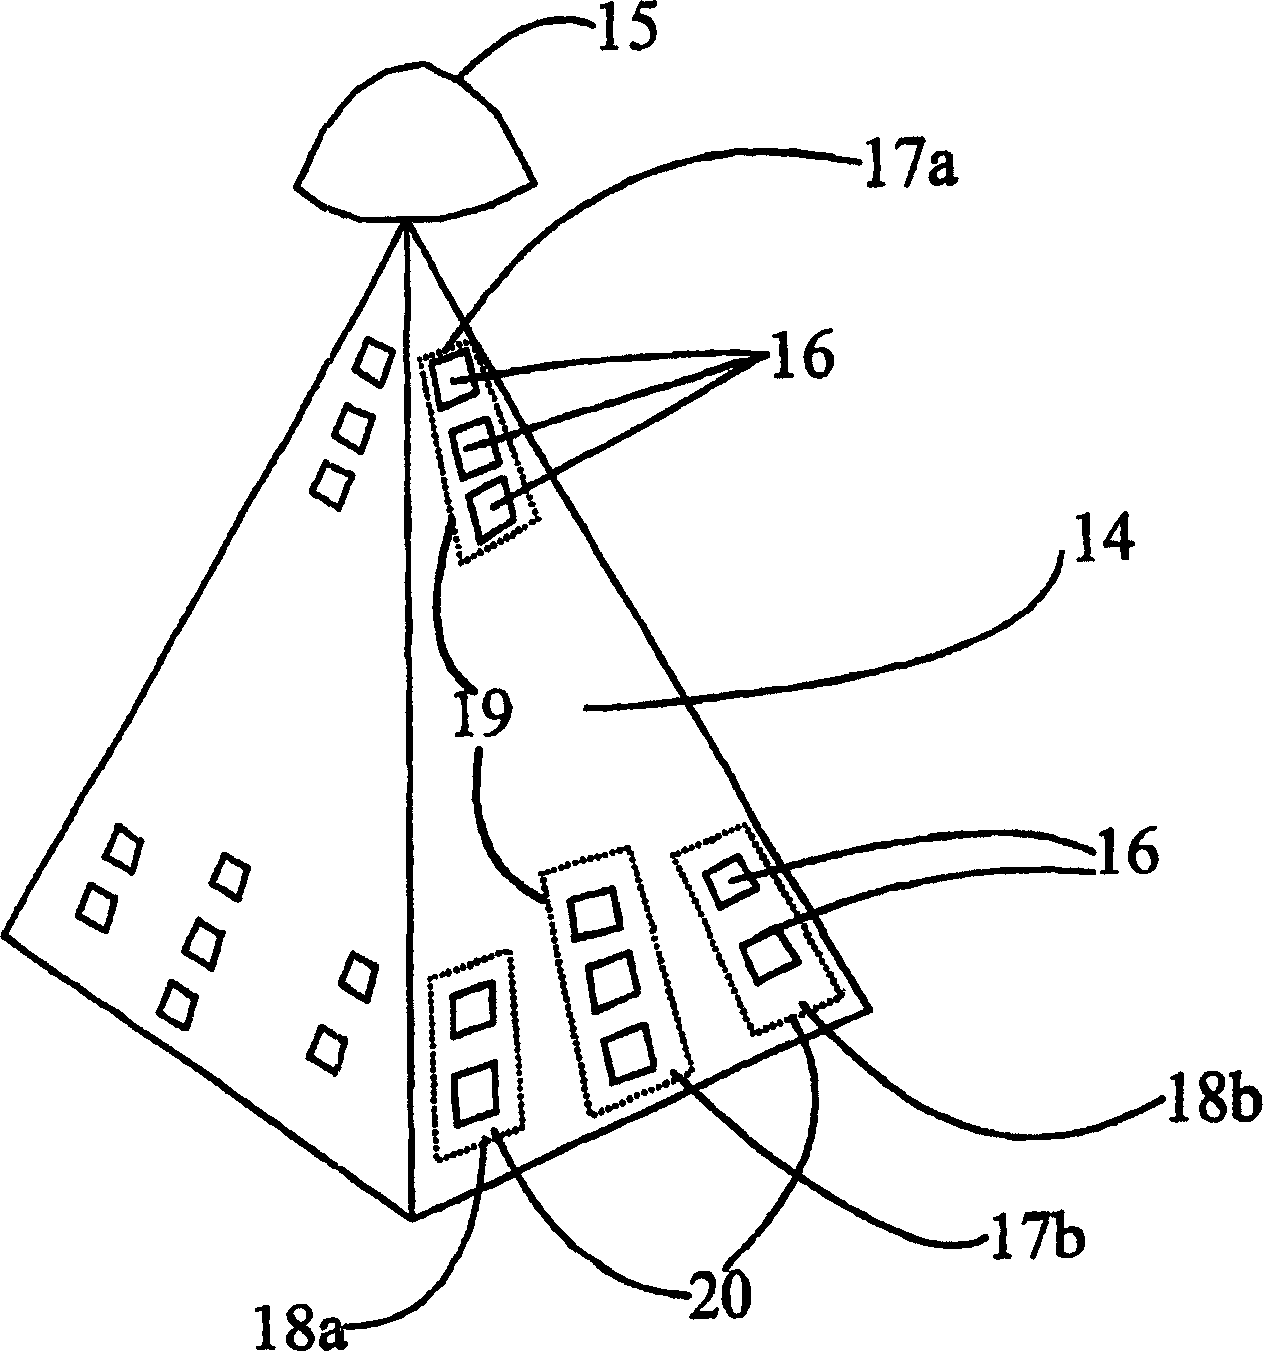 Antenna system and method for measuring the azimuth and elevation angles of an active, signal sending radiosonde